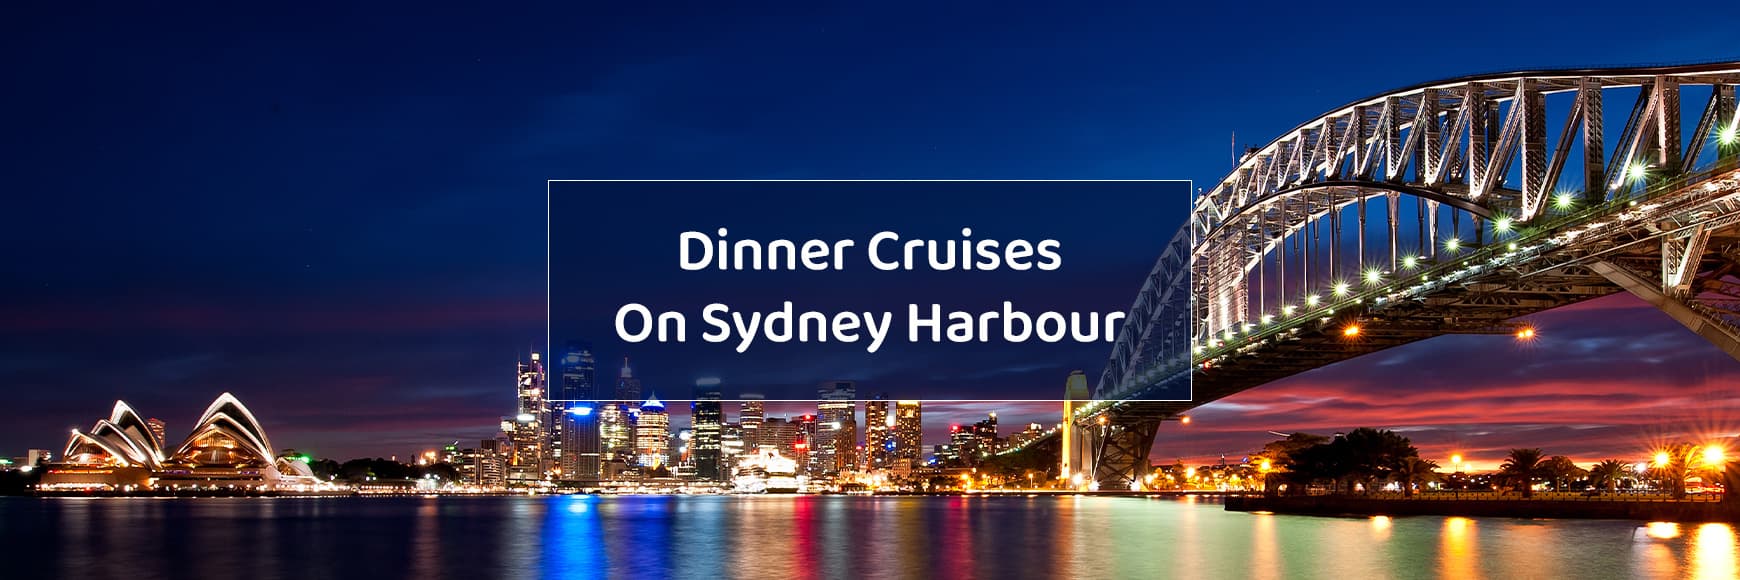 Experience the best of Sydney by night on a Port Jackson dinner cruise.